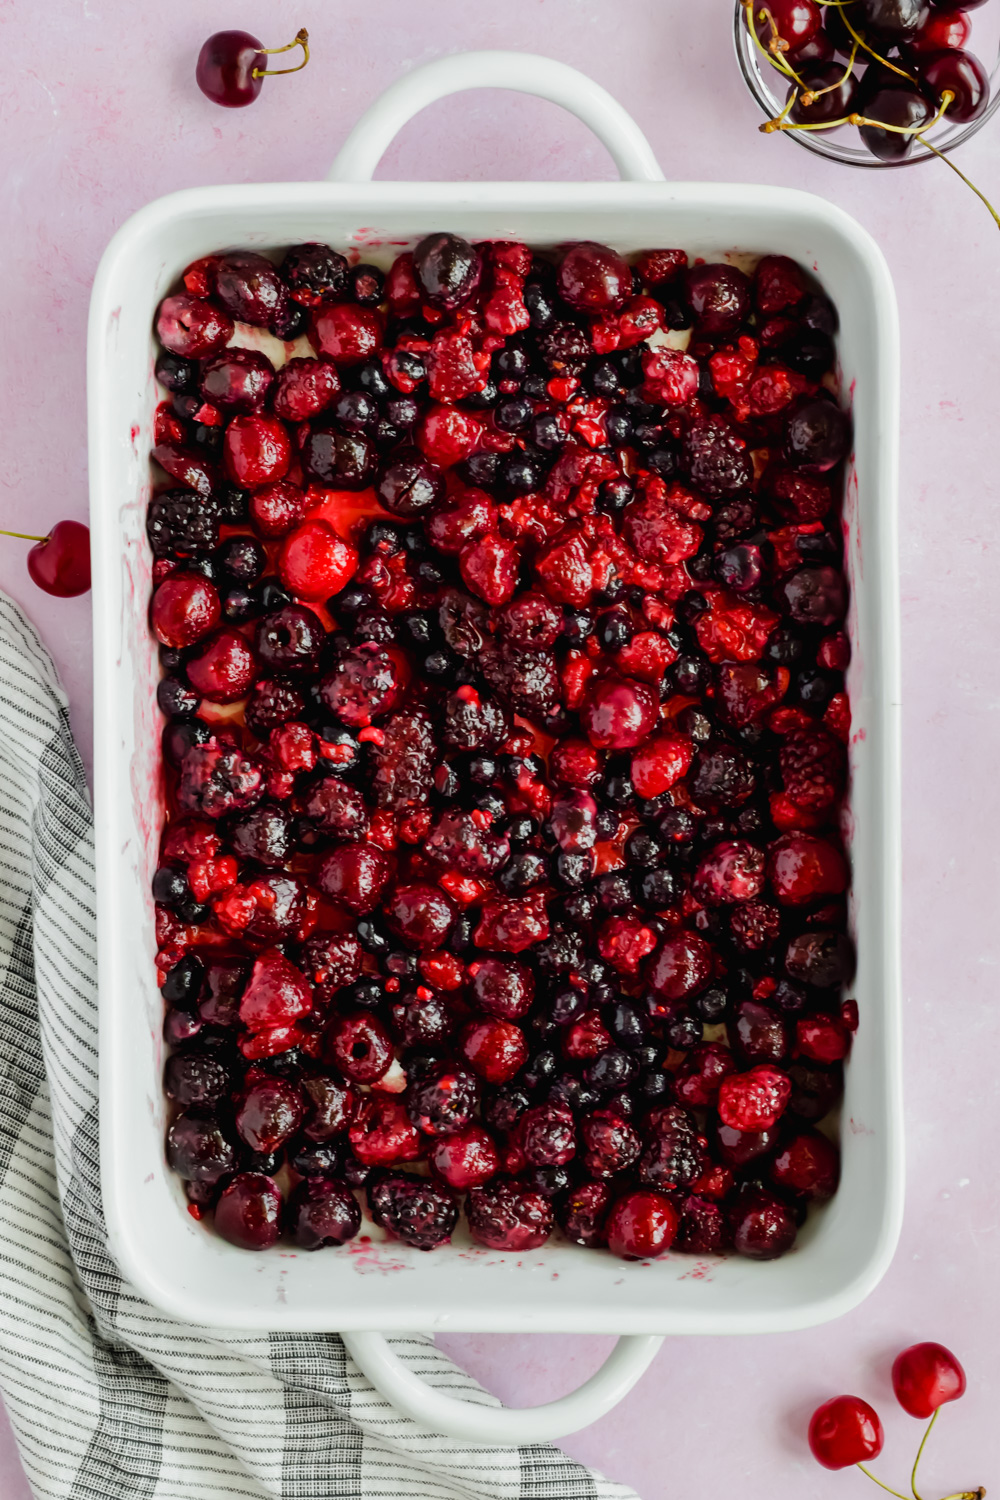 white baking dish filled with mixed berries and cherries surrounded by additional cherries.